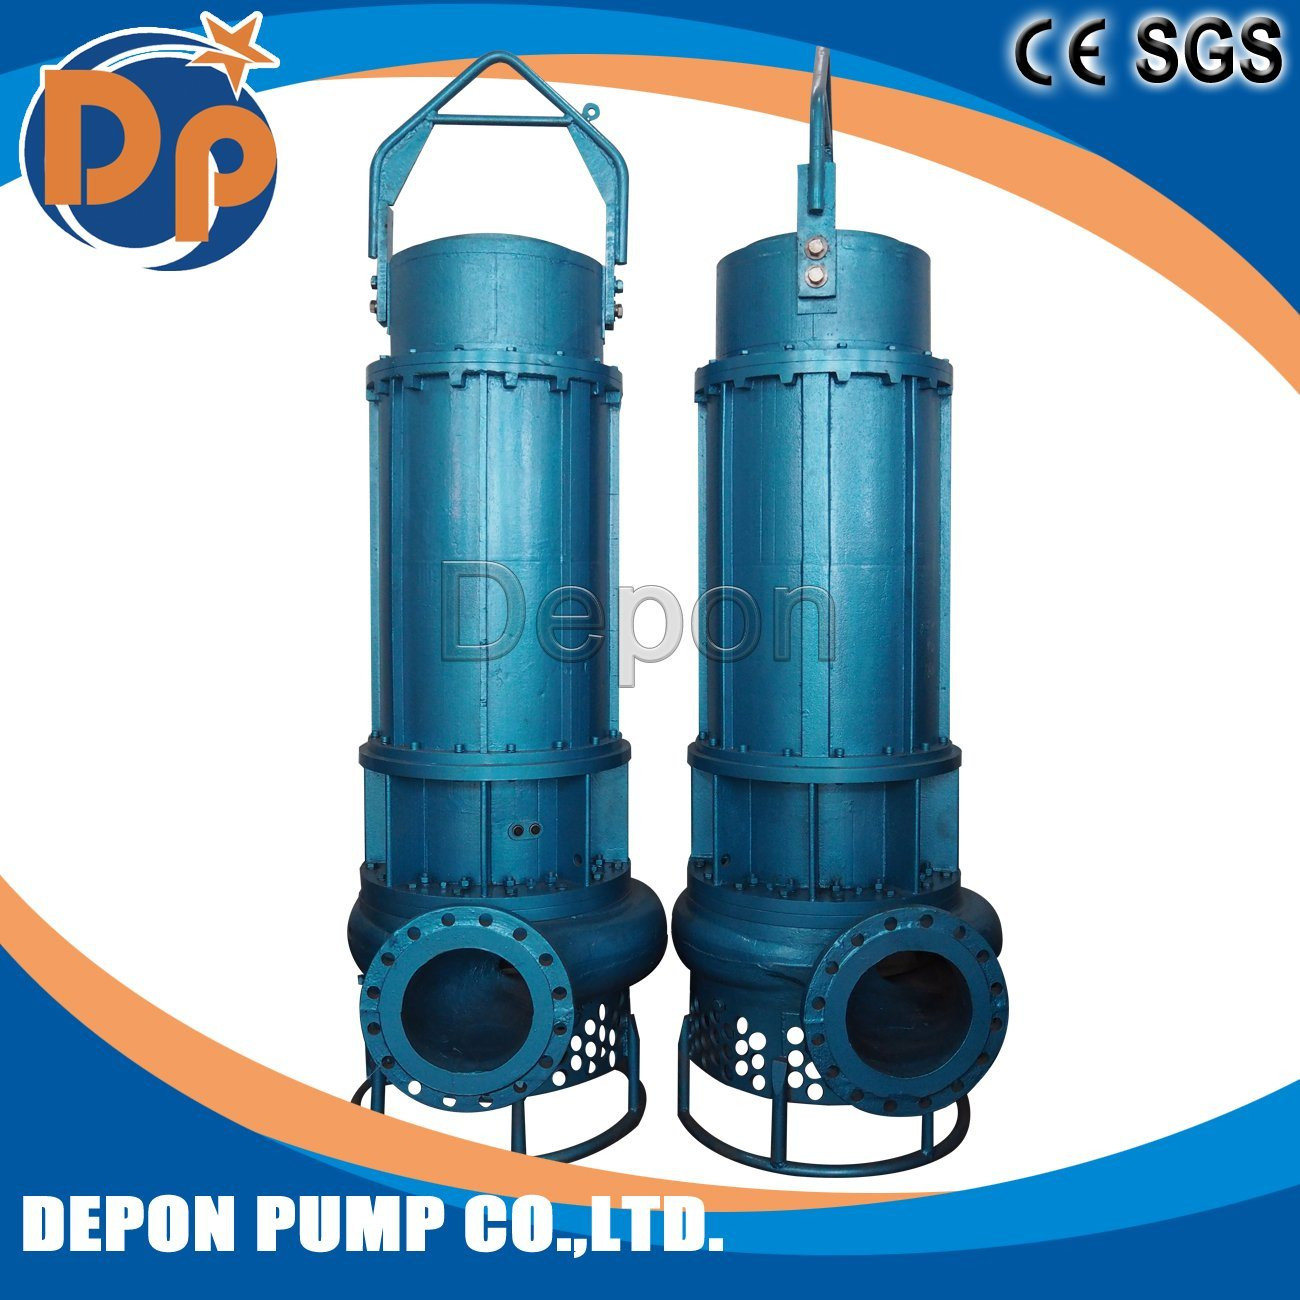 Heavy Duty Cr27 Cast Iron 110 Kw Submersible Pump of Small Diameter Slurry Pump Submersible Submersible Slurry Pump